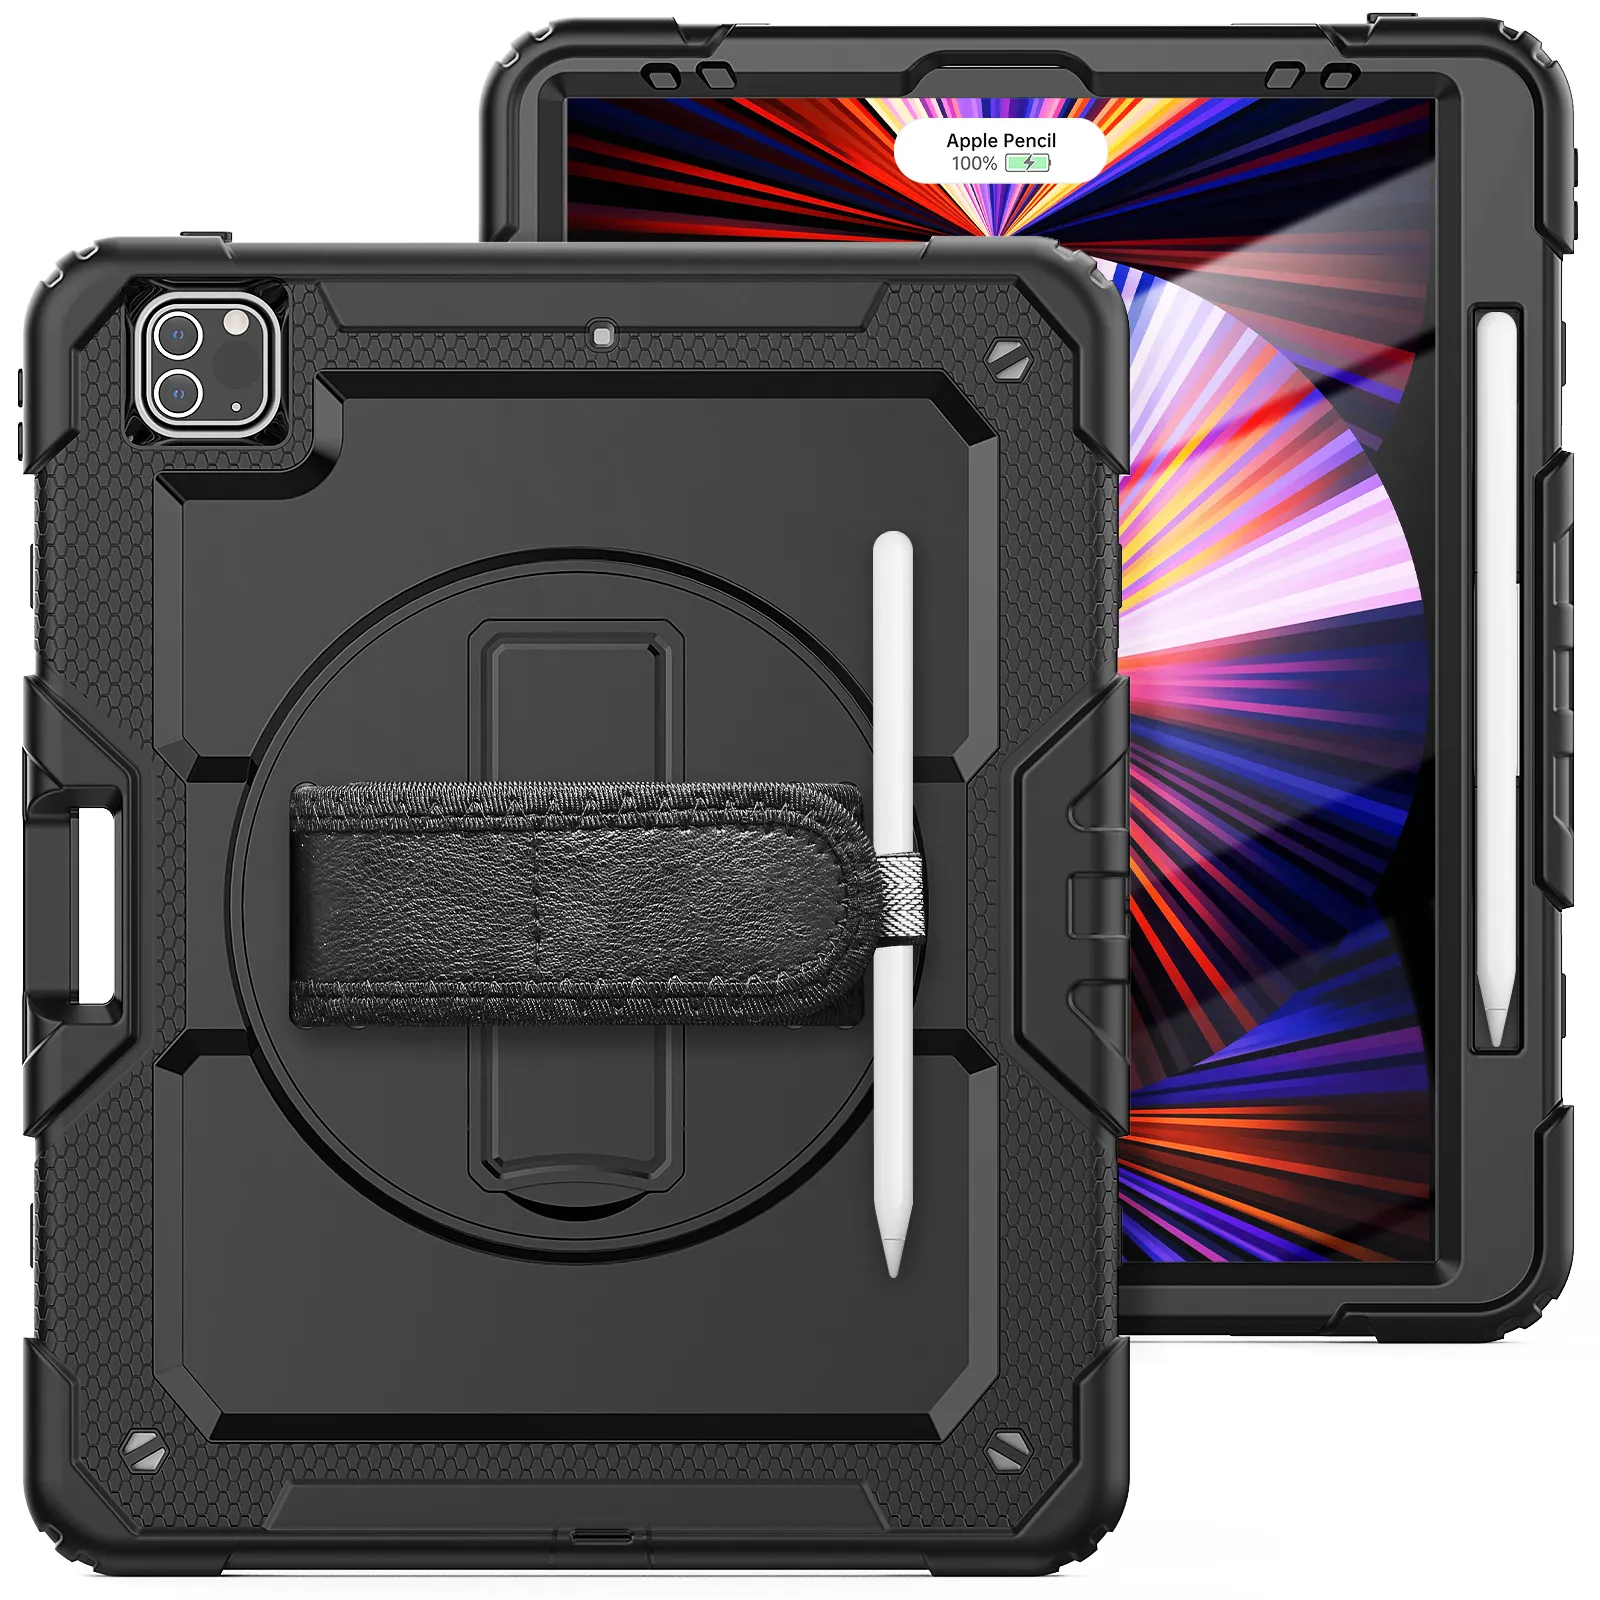 Homtak full Cover Heavy Duty Defender Shockproof rugged IPAD Stand Tablet Case For 12.9 inches